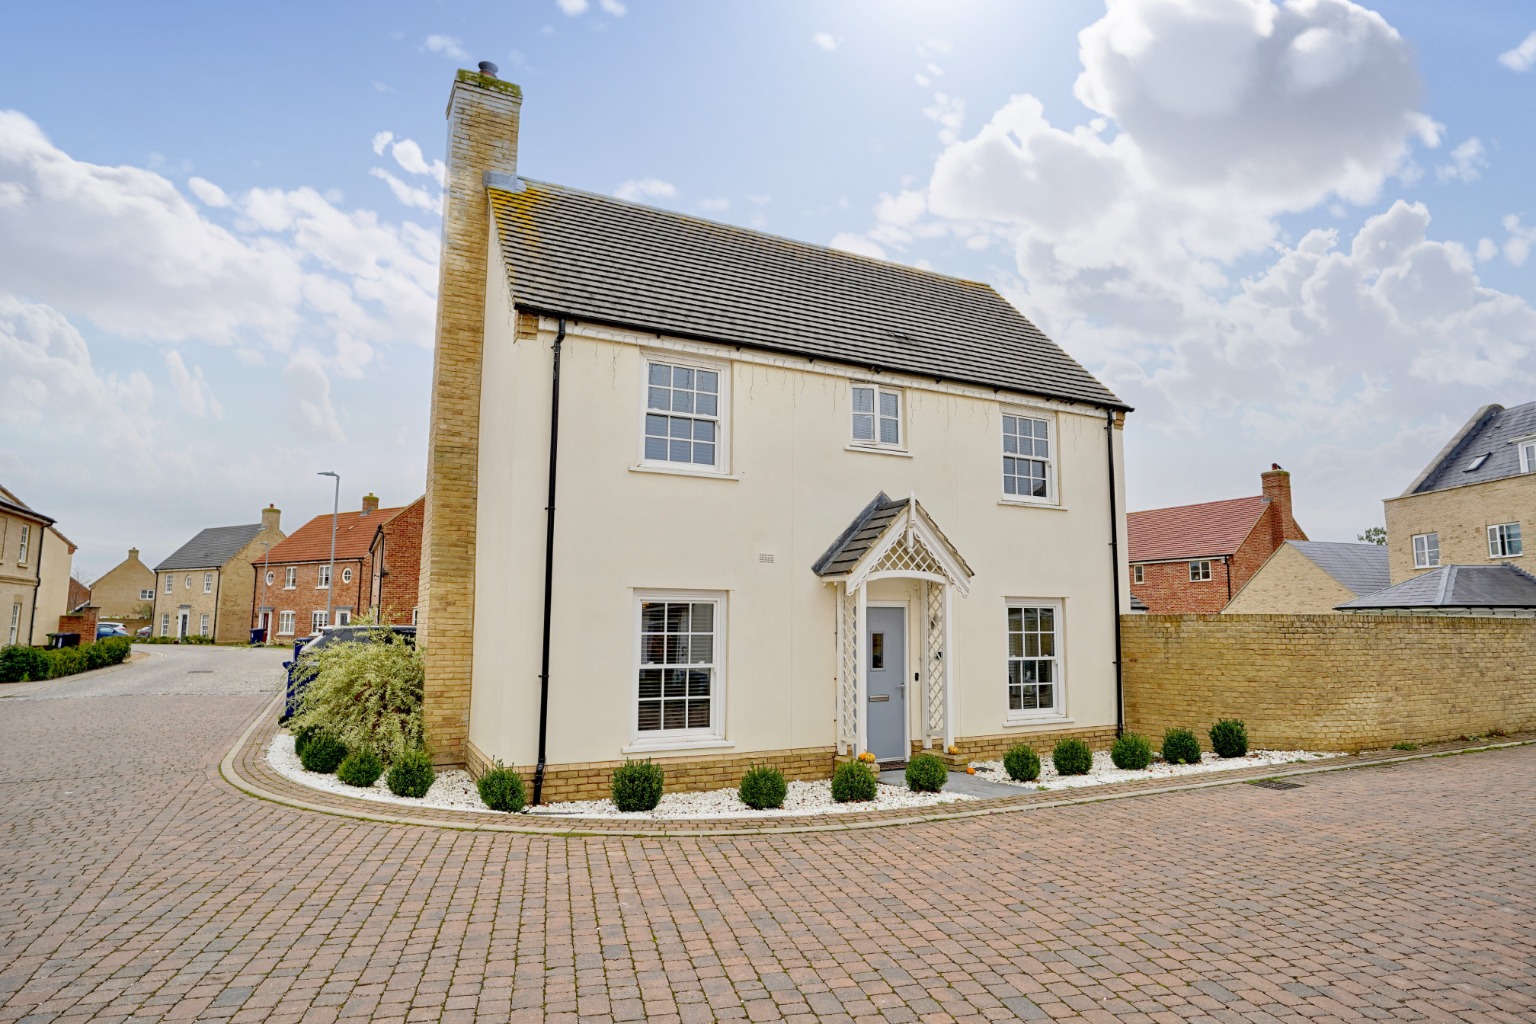 4 bed link detached house for sale in Horsfall Road, Huntingdon  - Property Image 1